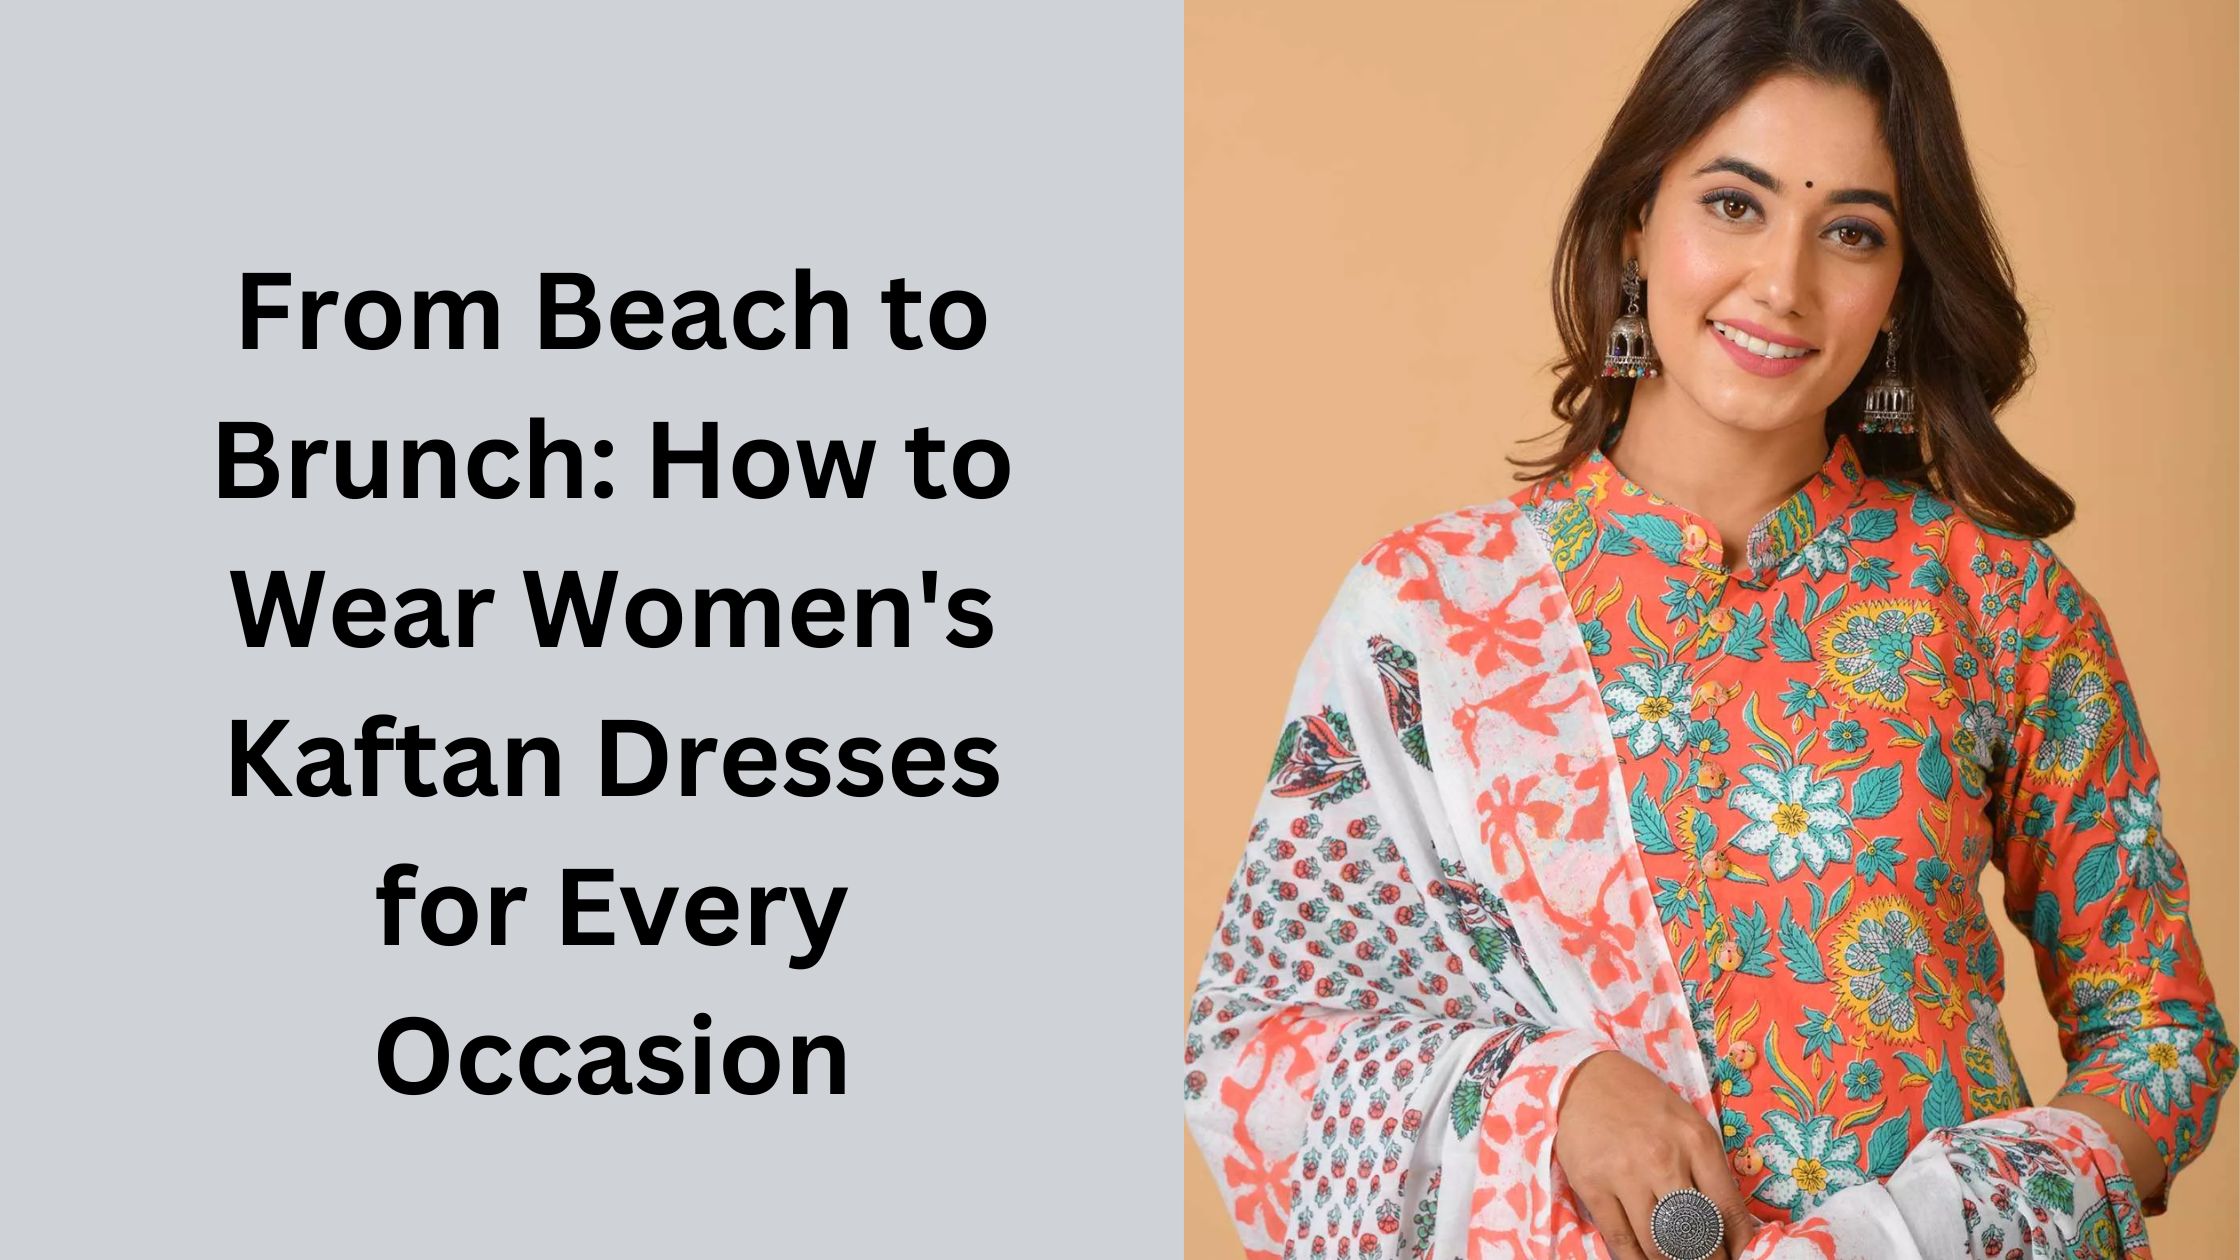 From Beach to Brunch: How to Wear Women's Kaftan Dresses for Every Occasion